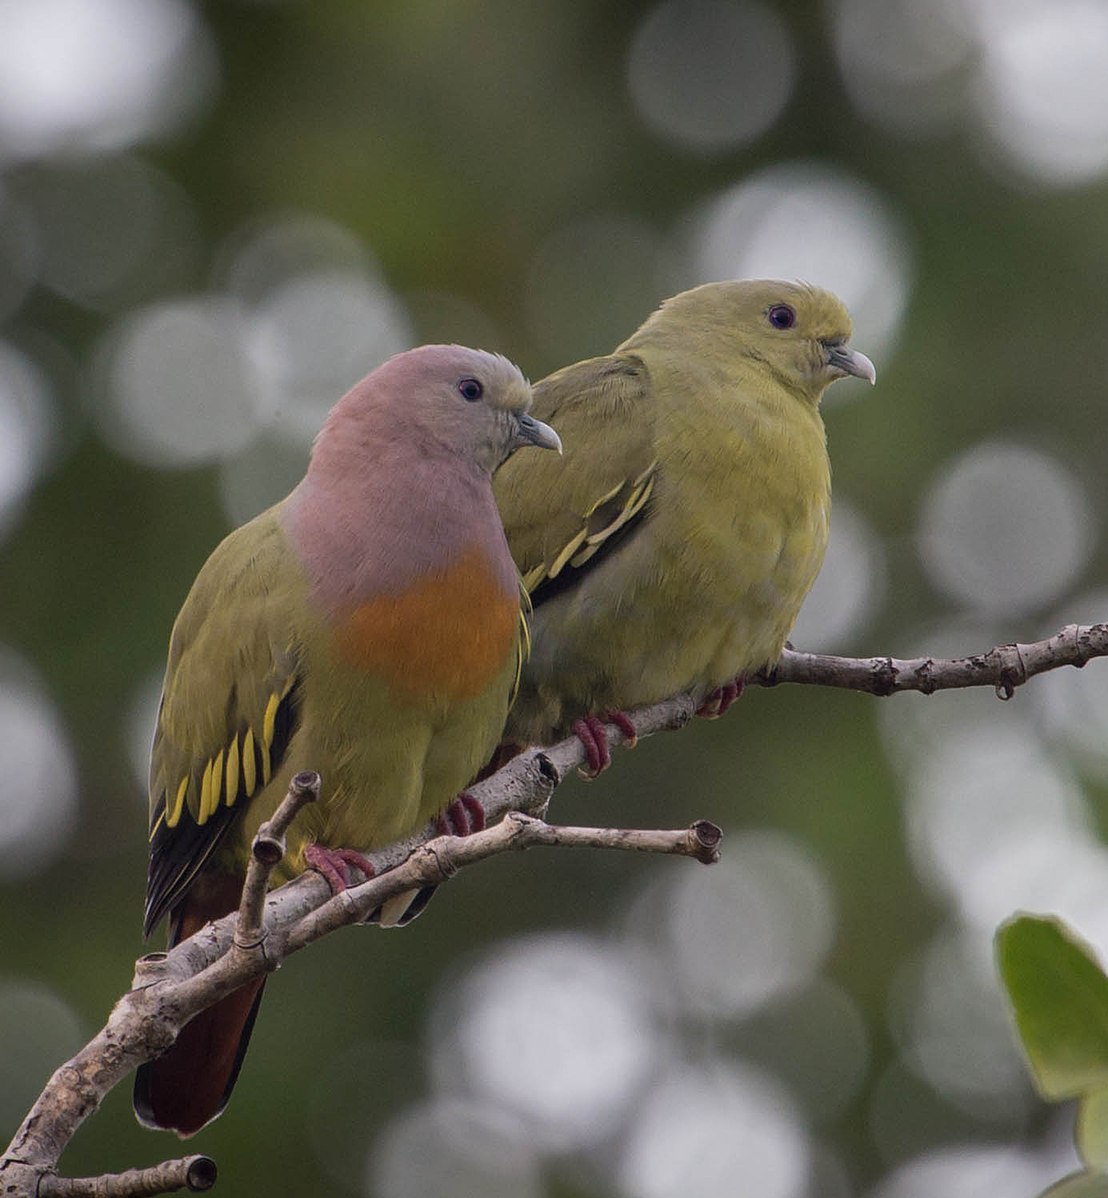 The pink-necked green pigeon, which surely deserves a more poetic name, looks like it flew straight out of a pastel artist's daydream. The pastel pigeon?